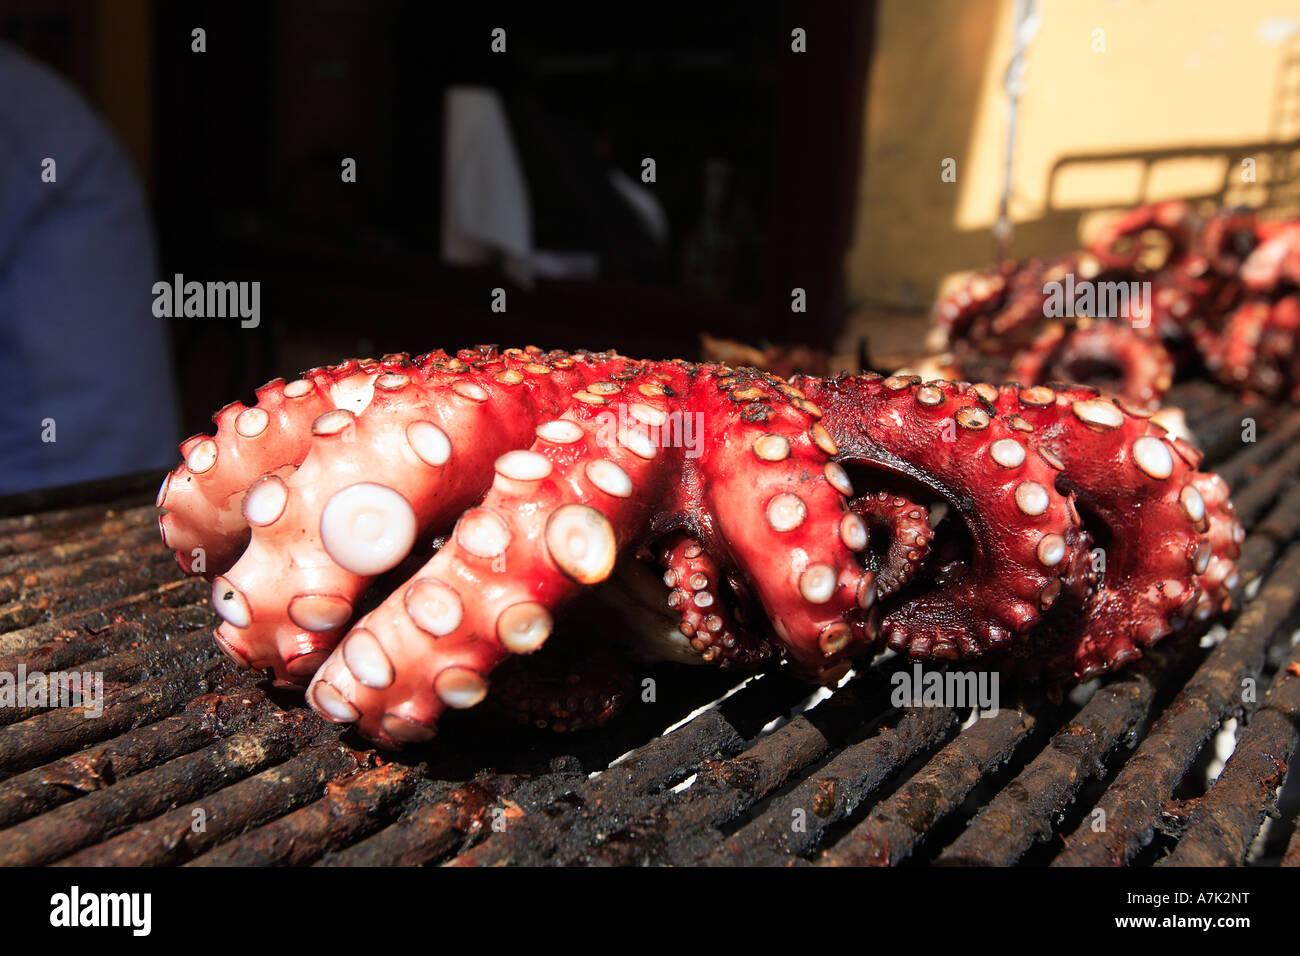 GREECE SARONIC GULF EGINA ISLAND A BUSY TAVERNA IN THE BACK STREETS OCTOPUS COOKING Stock Photo